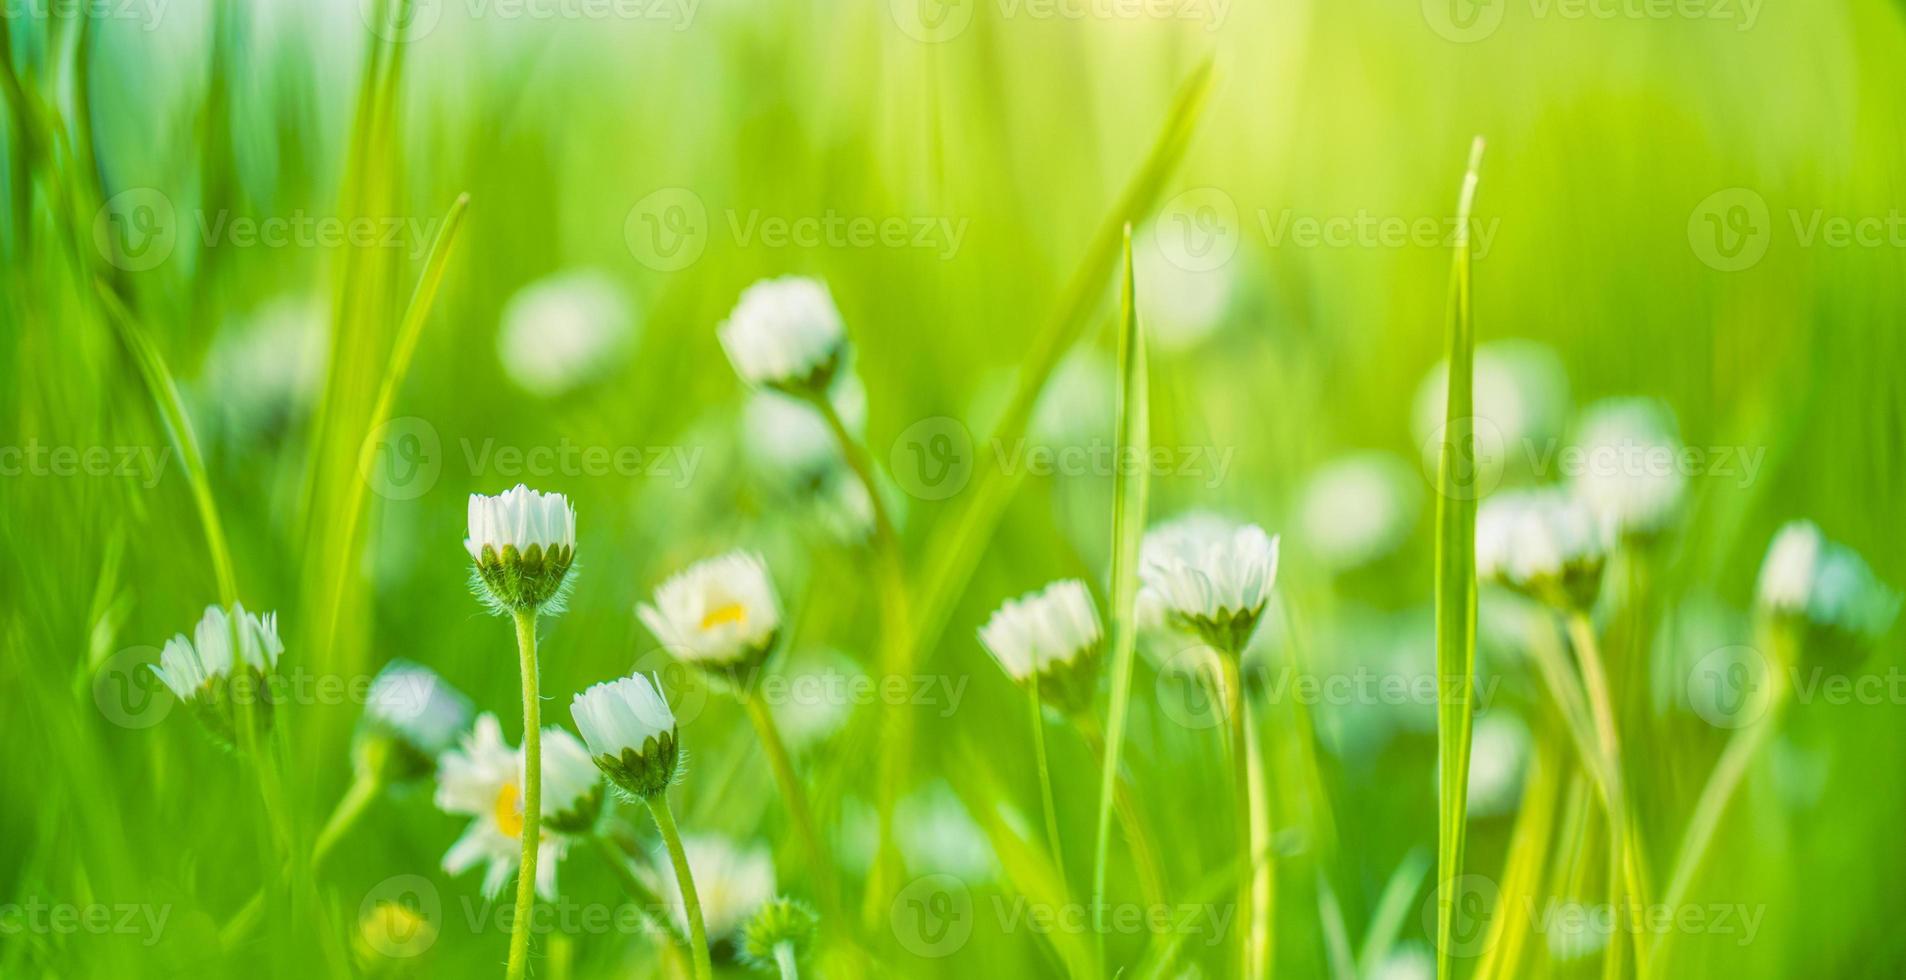 Abstract soft focus sunset field landscape of white flowers and grass meadow warm golden hour sunset sunrise time. Tranquil spring summer nature closeup and blurred forest background. Idyllic nature photo